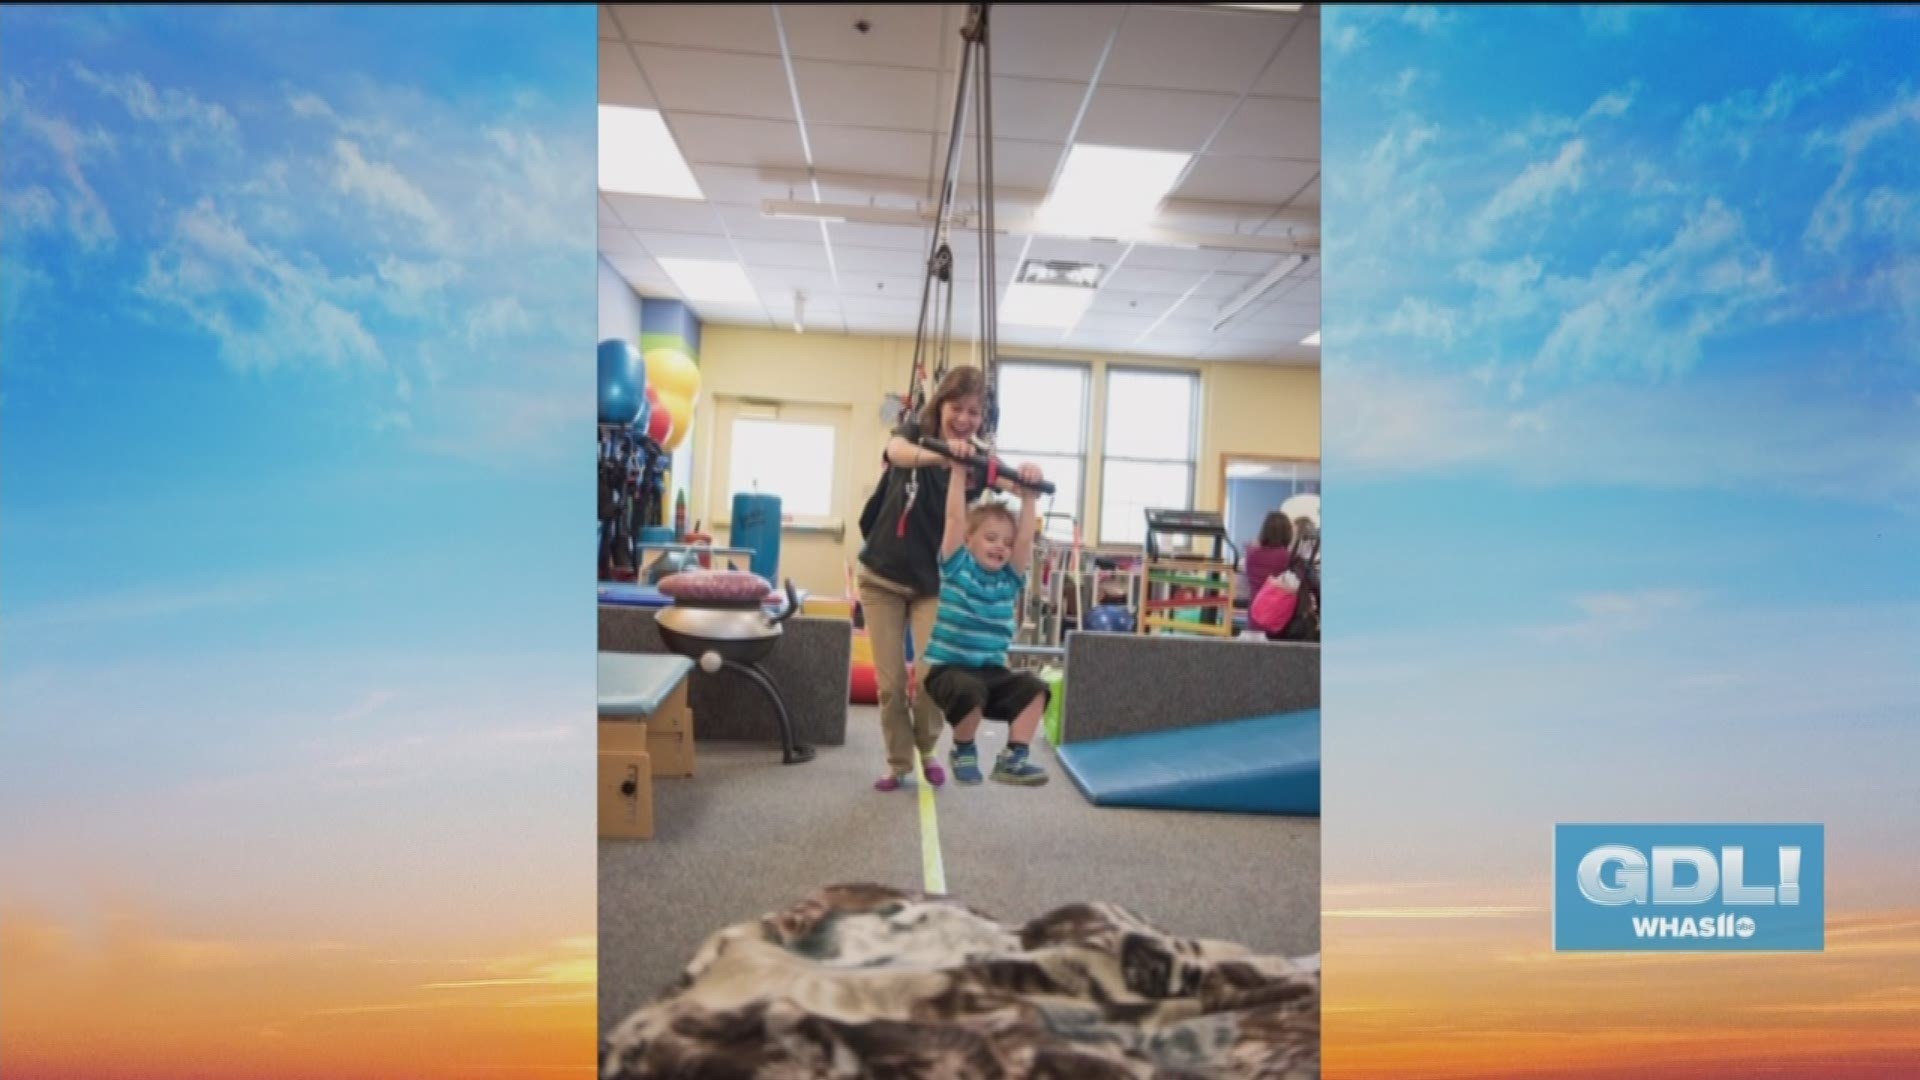 For 60 years, kids in Kentuckiana have been getting physical, occupational and speech therapies for their special needs at the Kids Center.